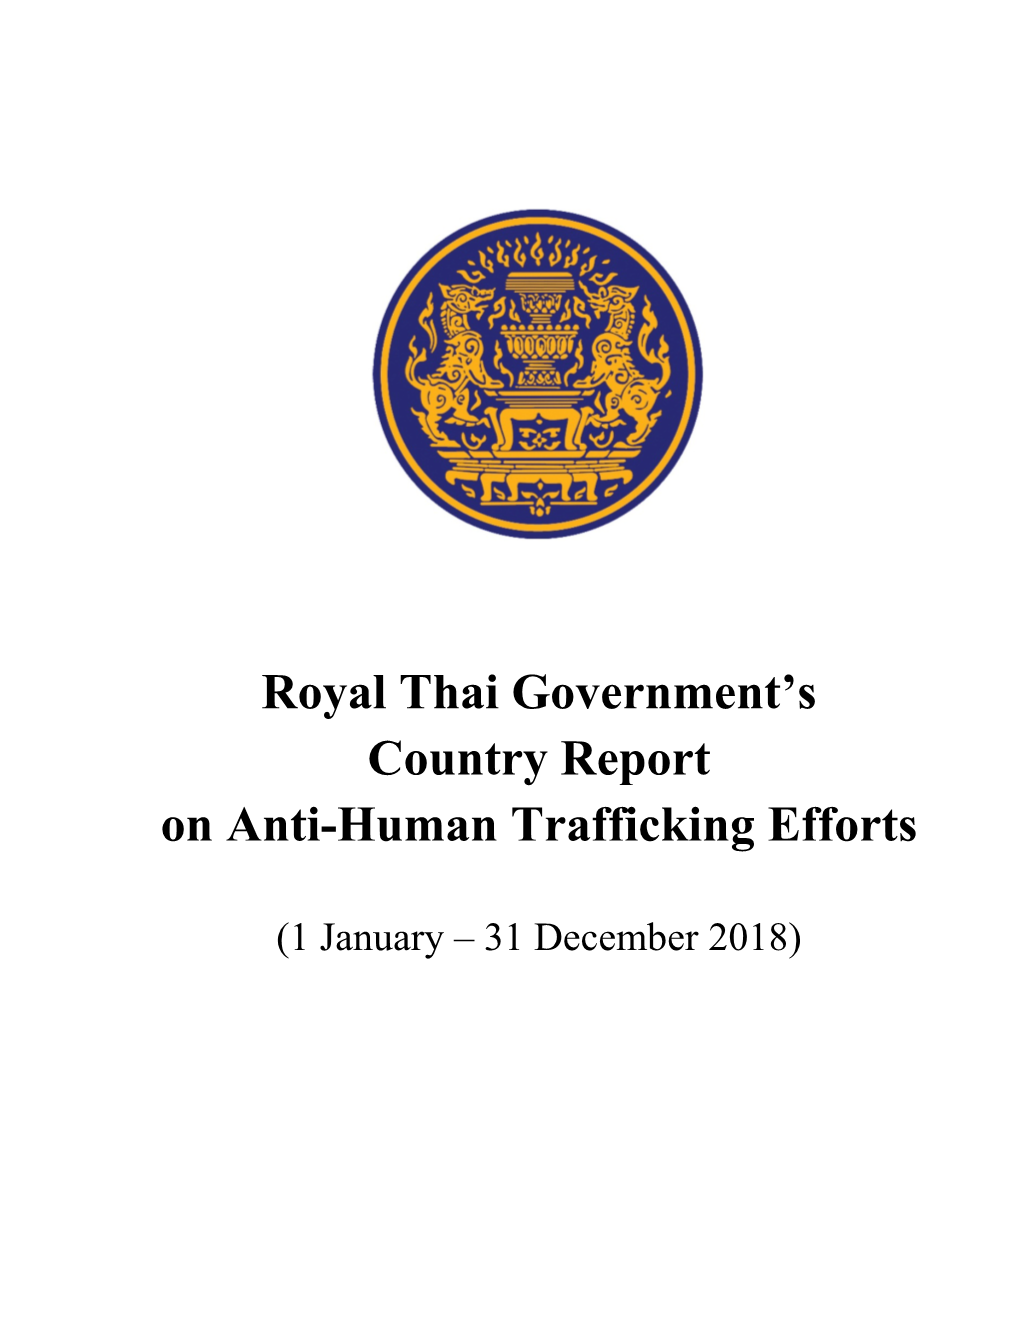 Royal Thai Government Report 2018